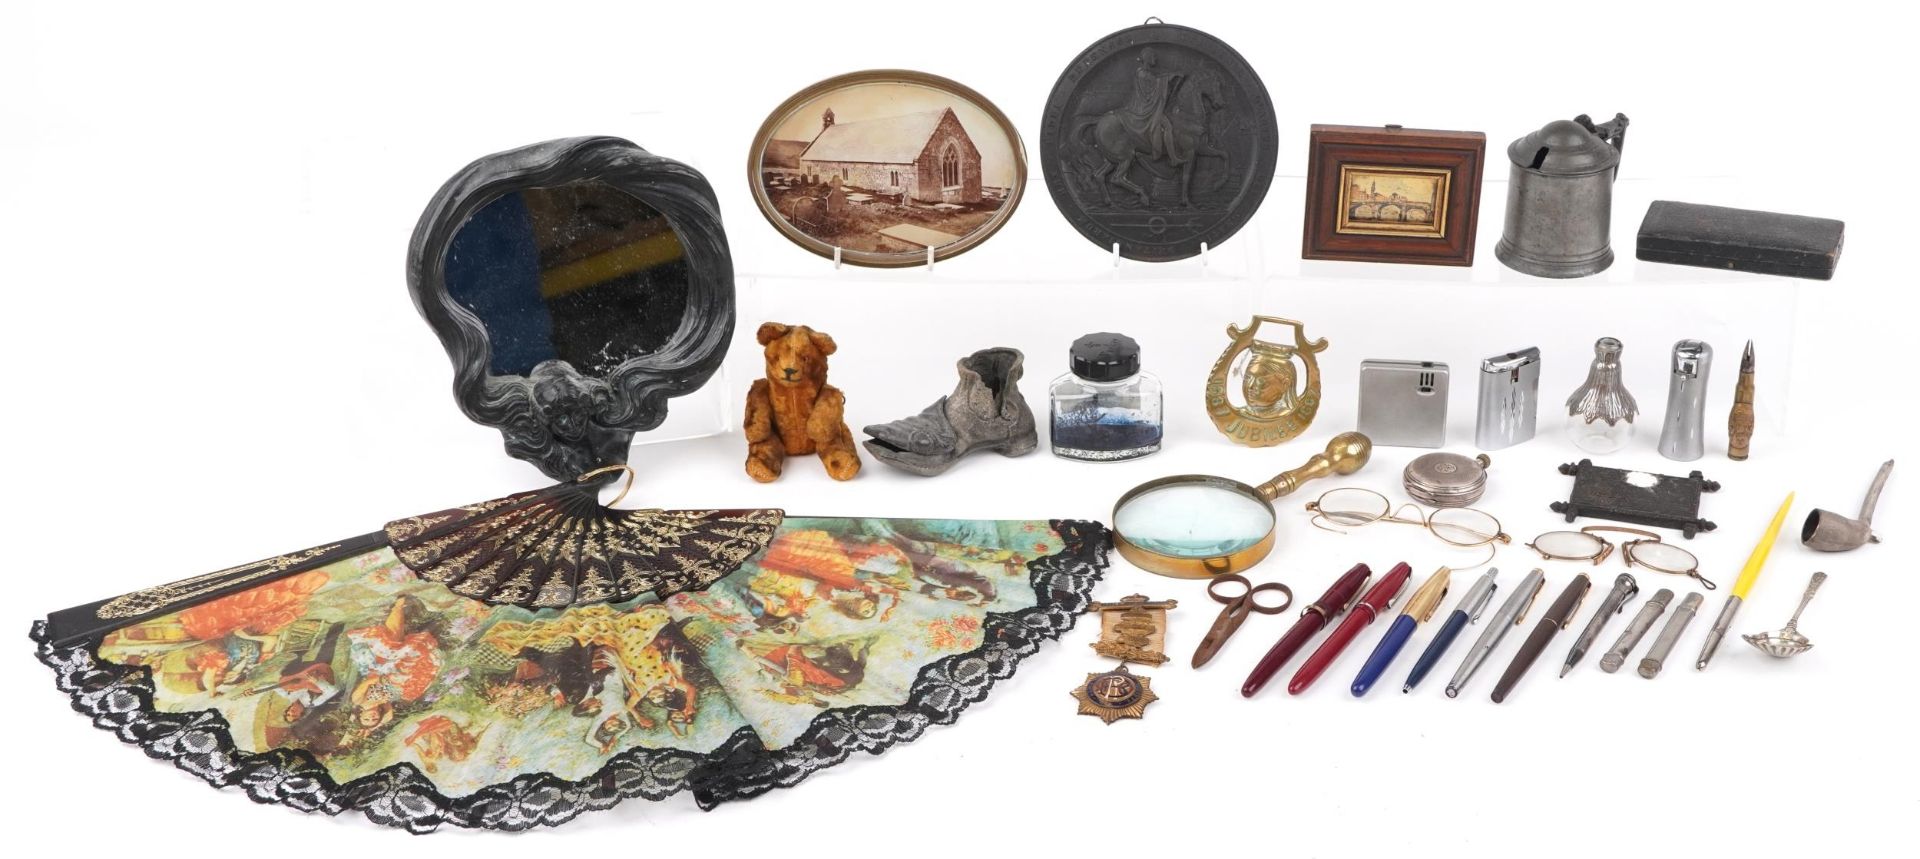 19th century and later sundry items including a silver pocket watch, silver overlaid glass vase,